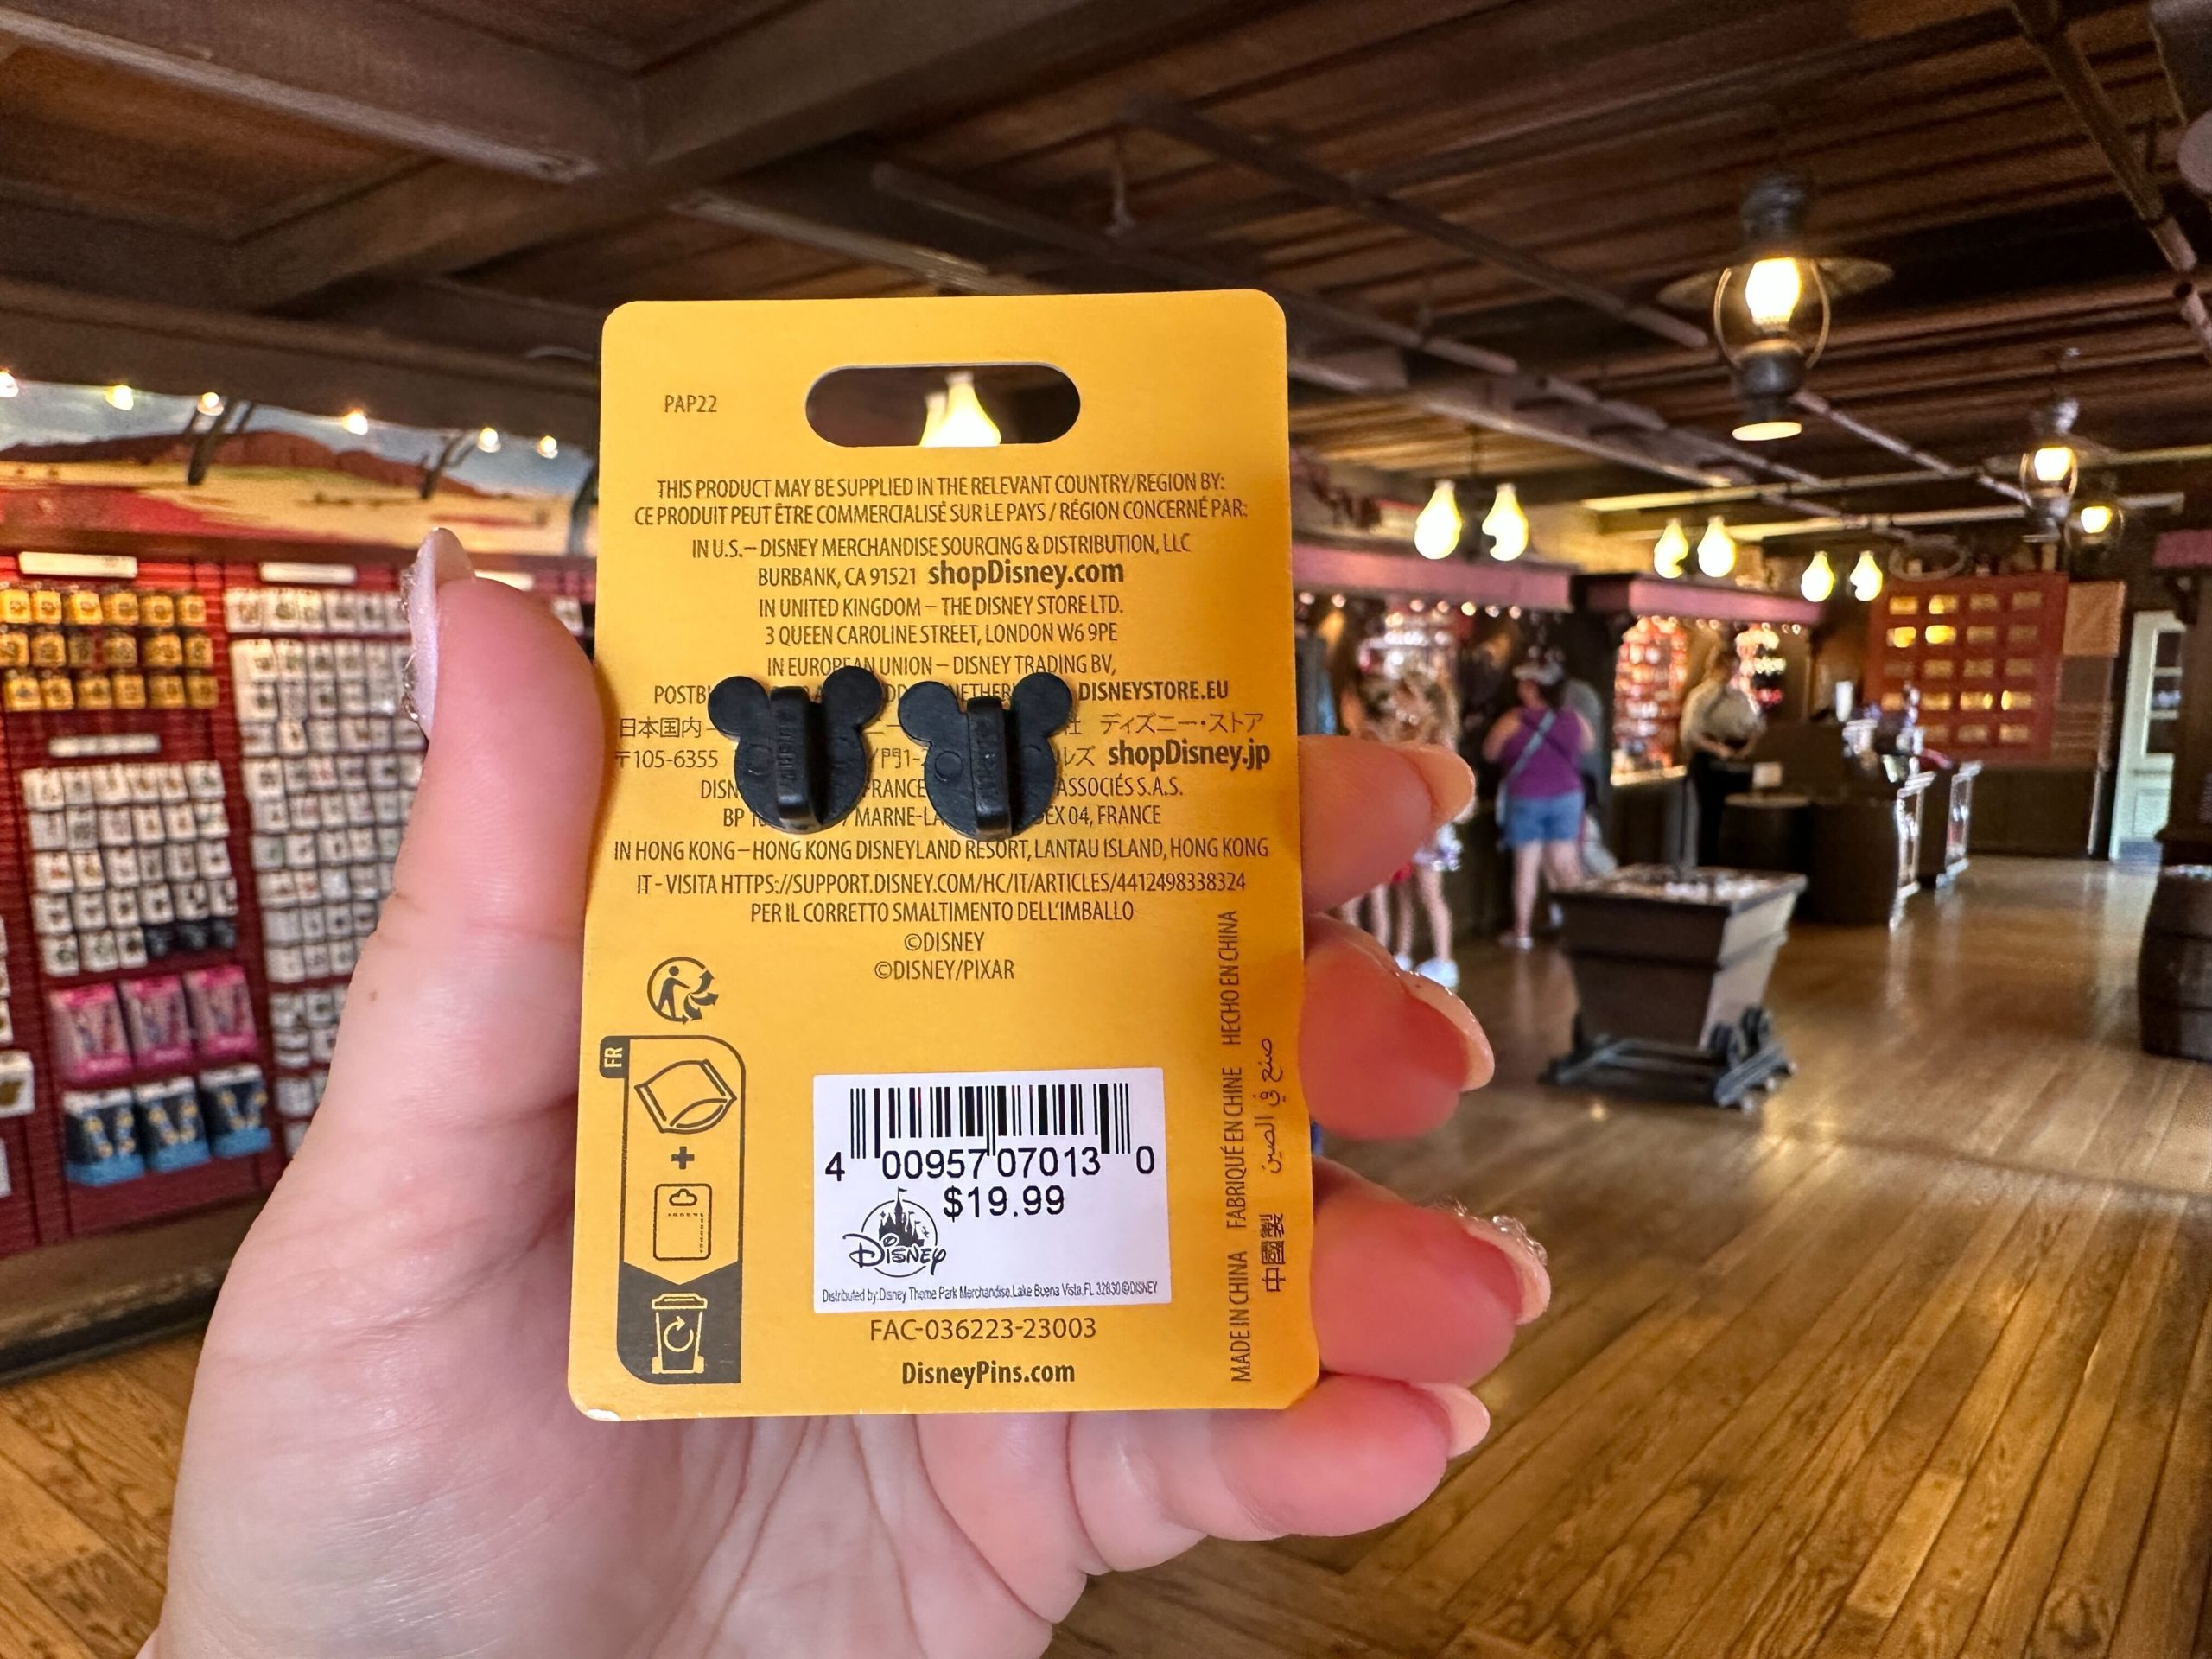 New pin releases at frontier trading post